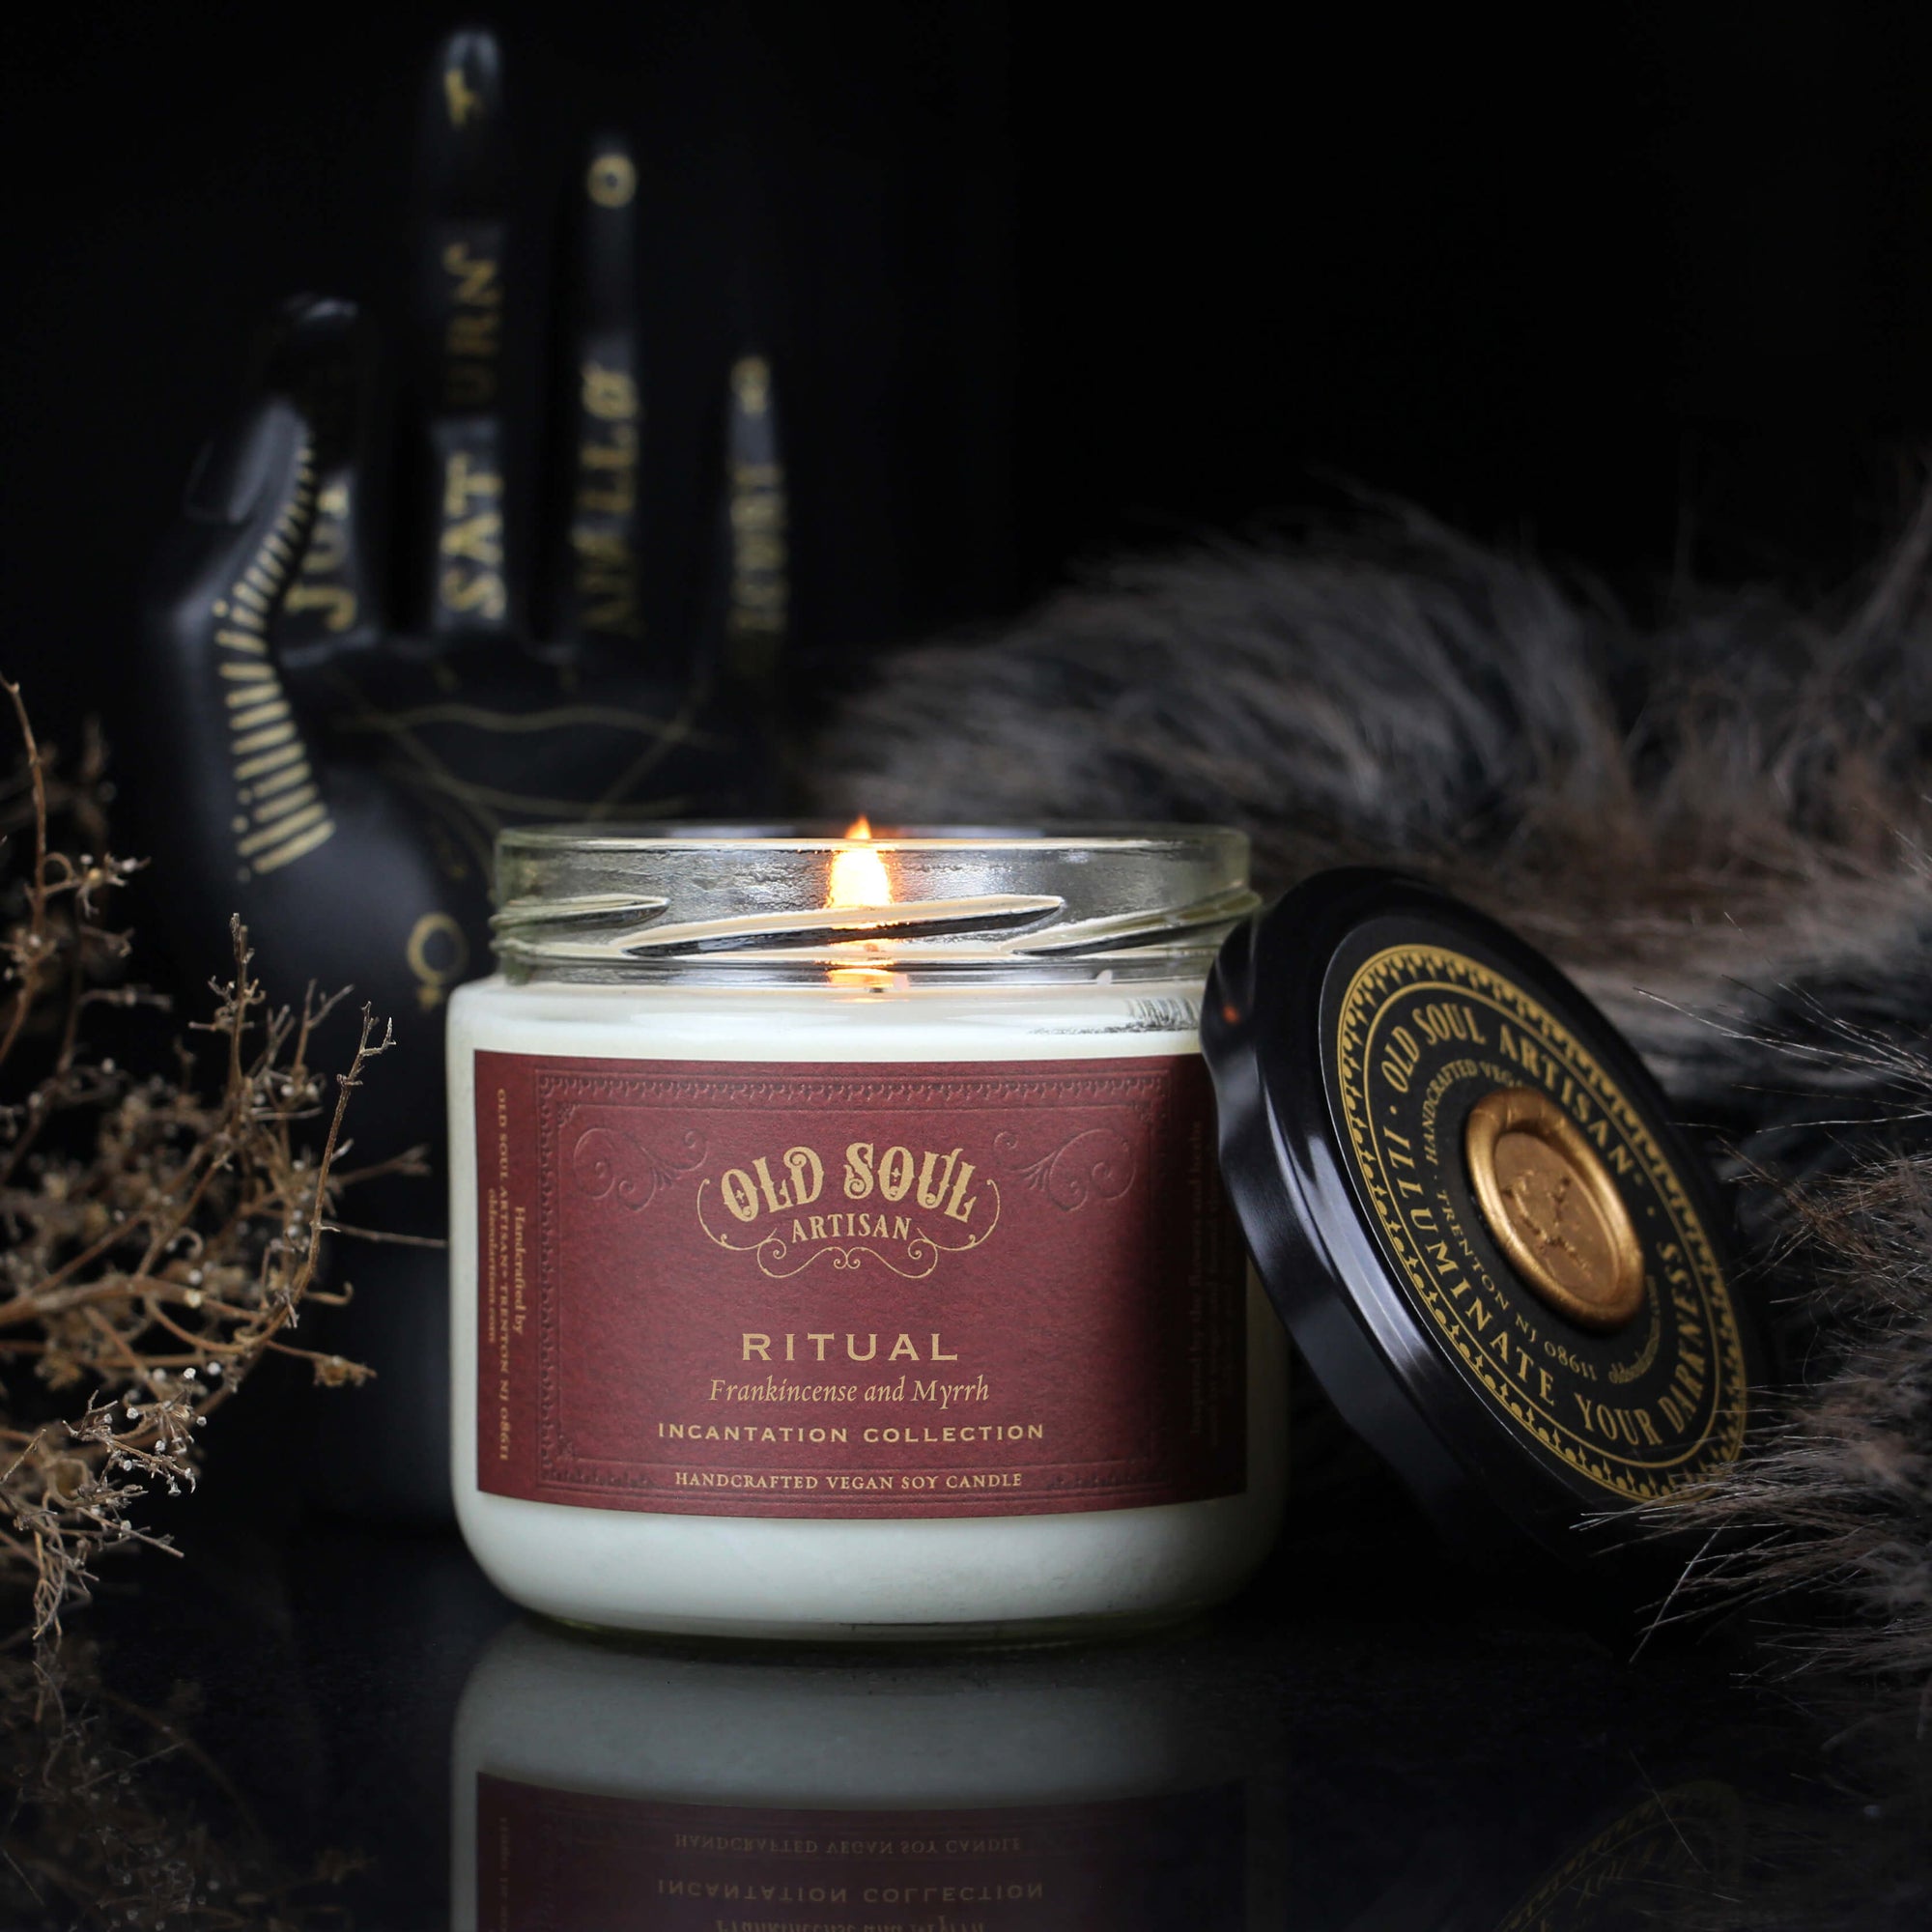 Oudh, Rose & Frankincense Soy Candle